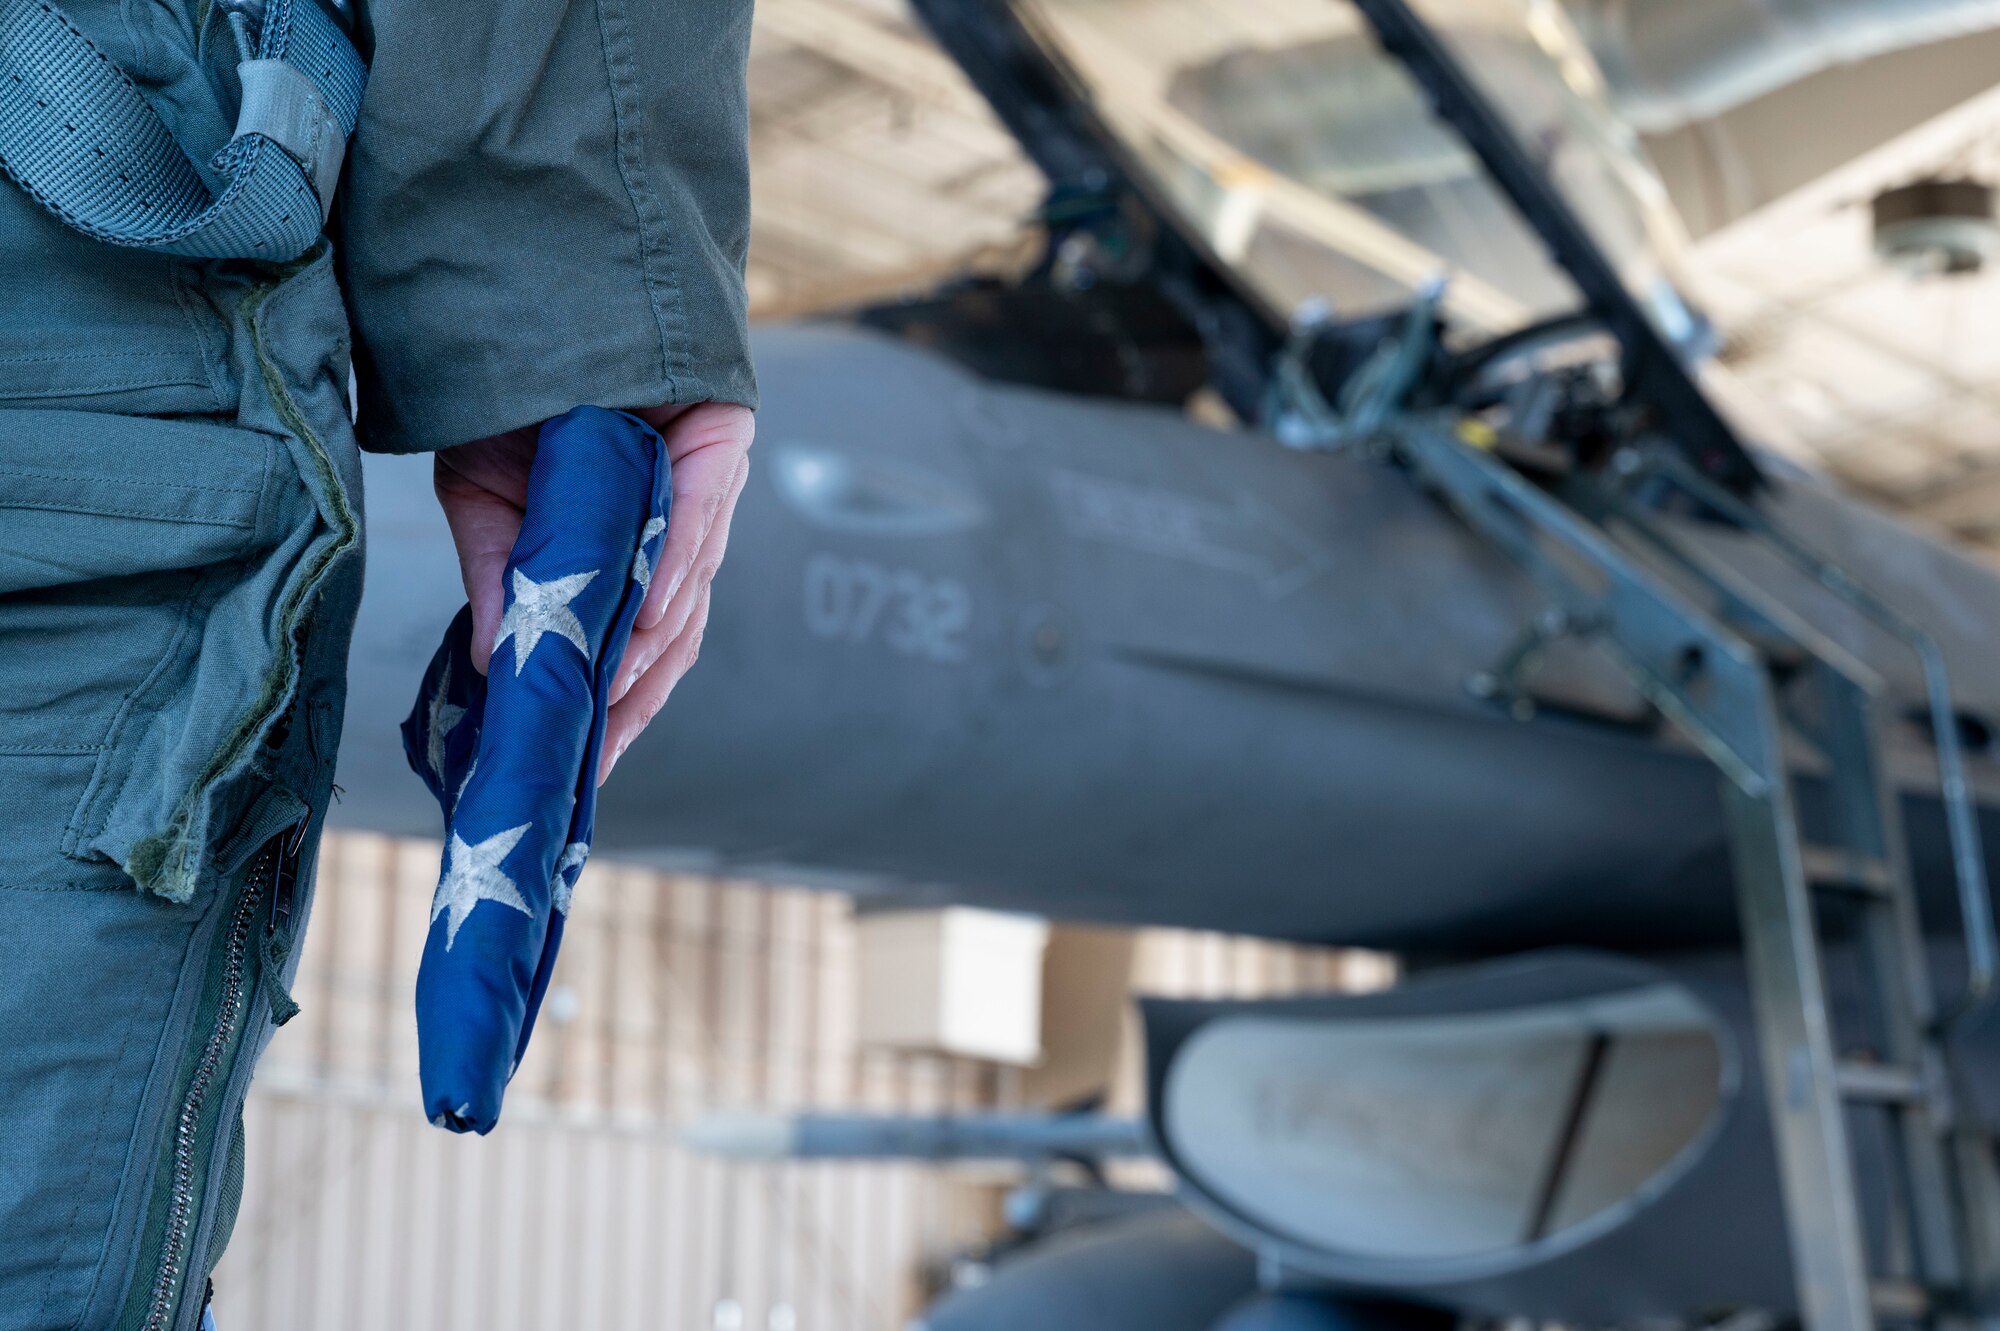 U.S. Air Force Maj. Matthew Jerrell, 314th Fighter Squadron instructor pilot, carries an American flag to an F-16 Viper at Holloman Air Force Base, New Mexico, March 27, 2023.